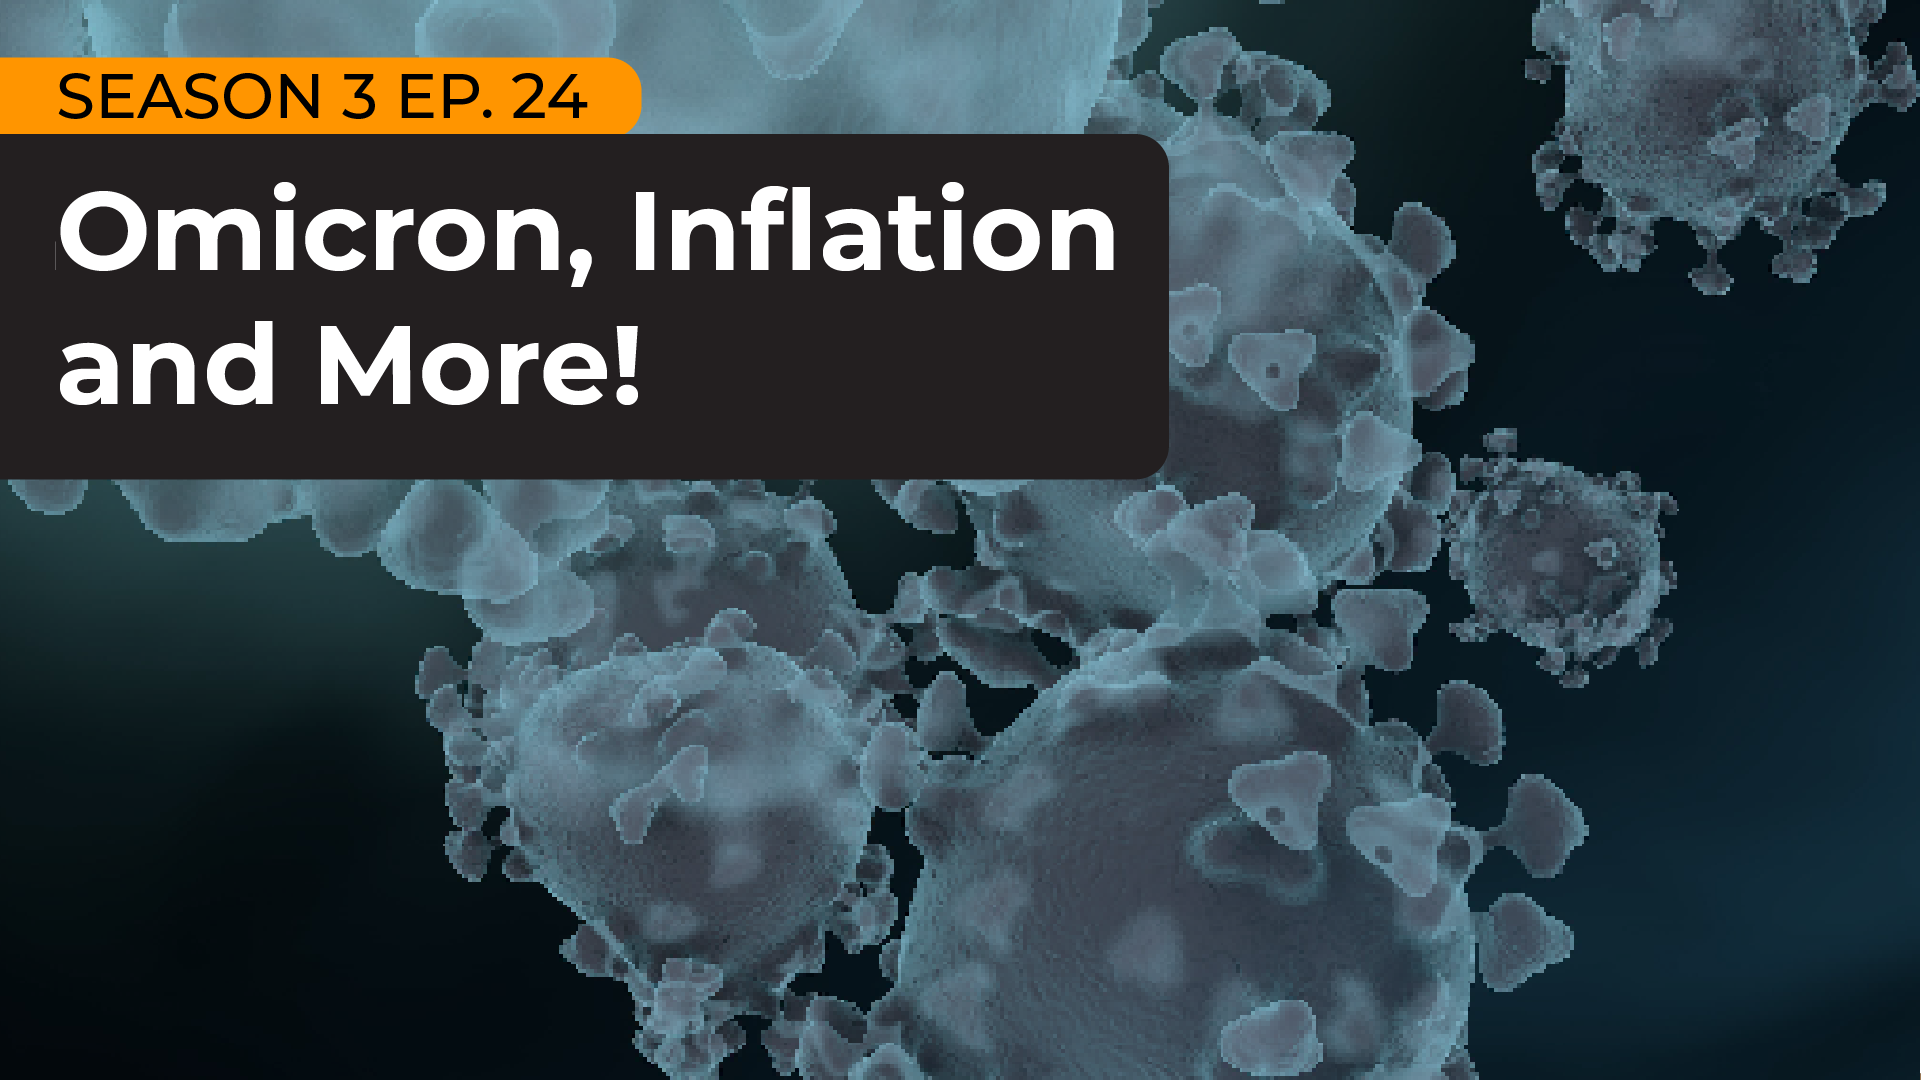 Join hosts Jack Li, Mark Brandau and Kendra Keenan as they discuss the latest food and beverage industry updates, including COVID impacts, consumer sentiment on the Omicron variant, and inflation and supply chain challenges.